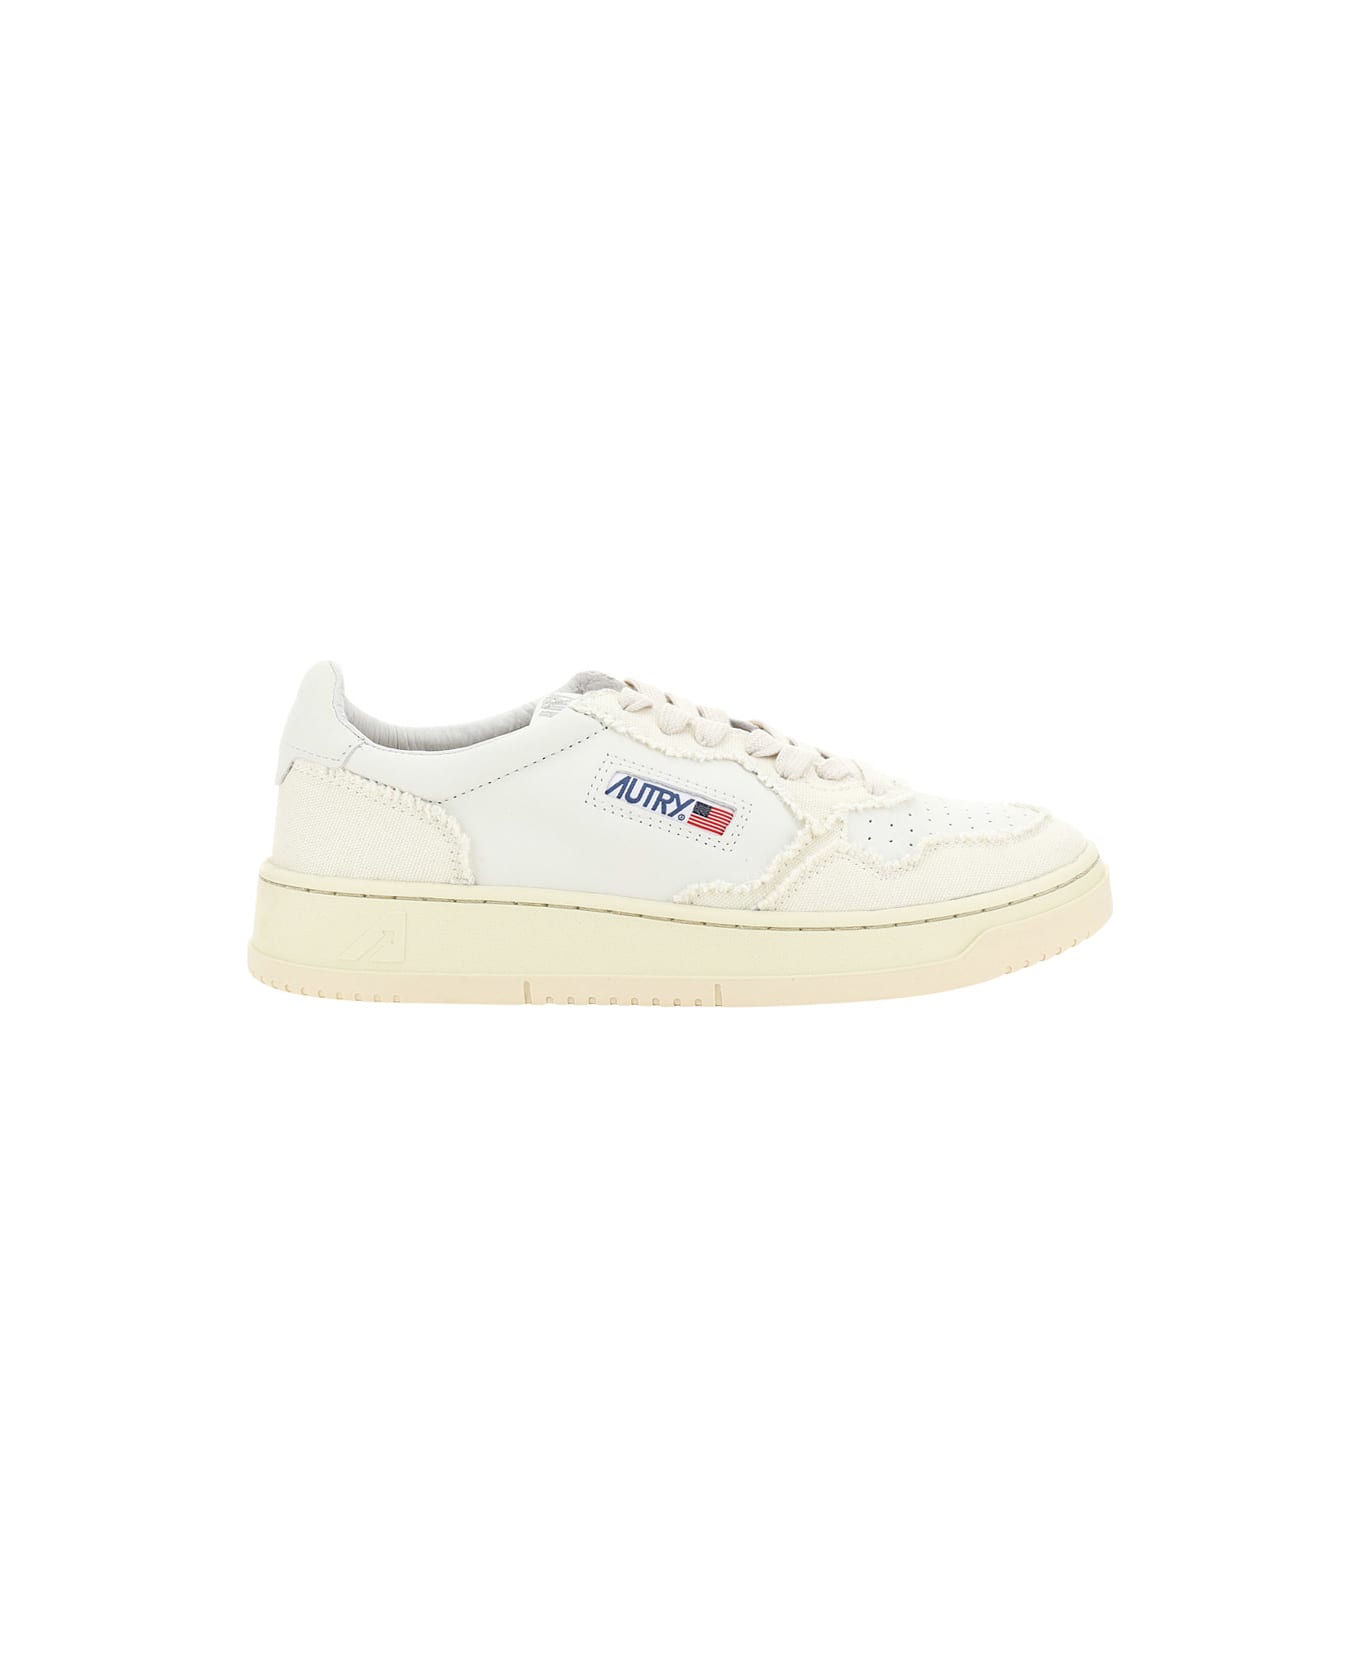 Autry Low 01 Sneakers - White